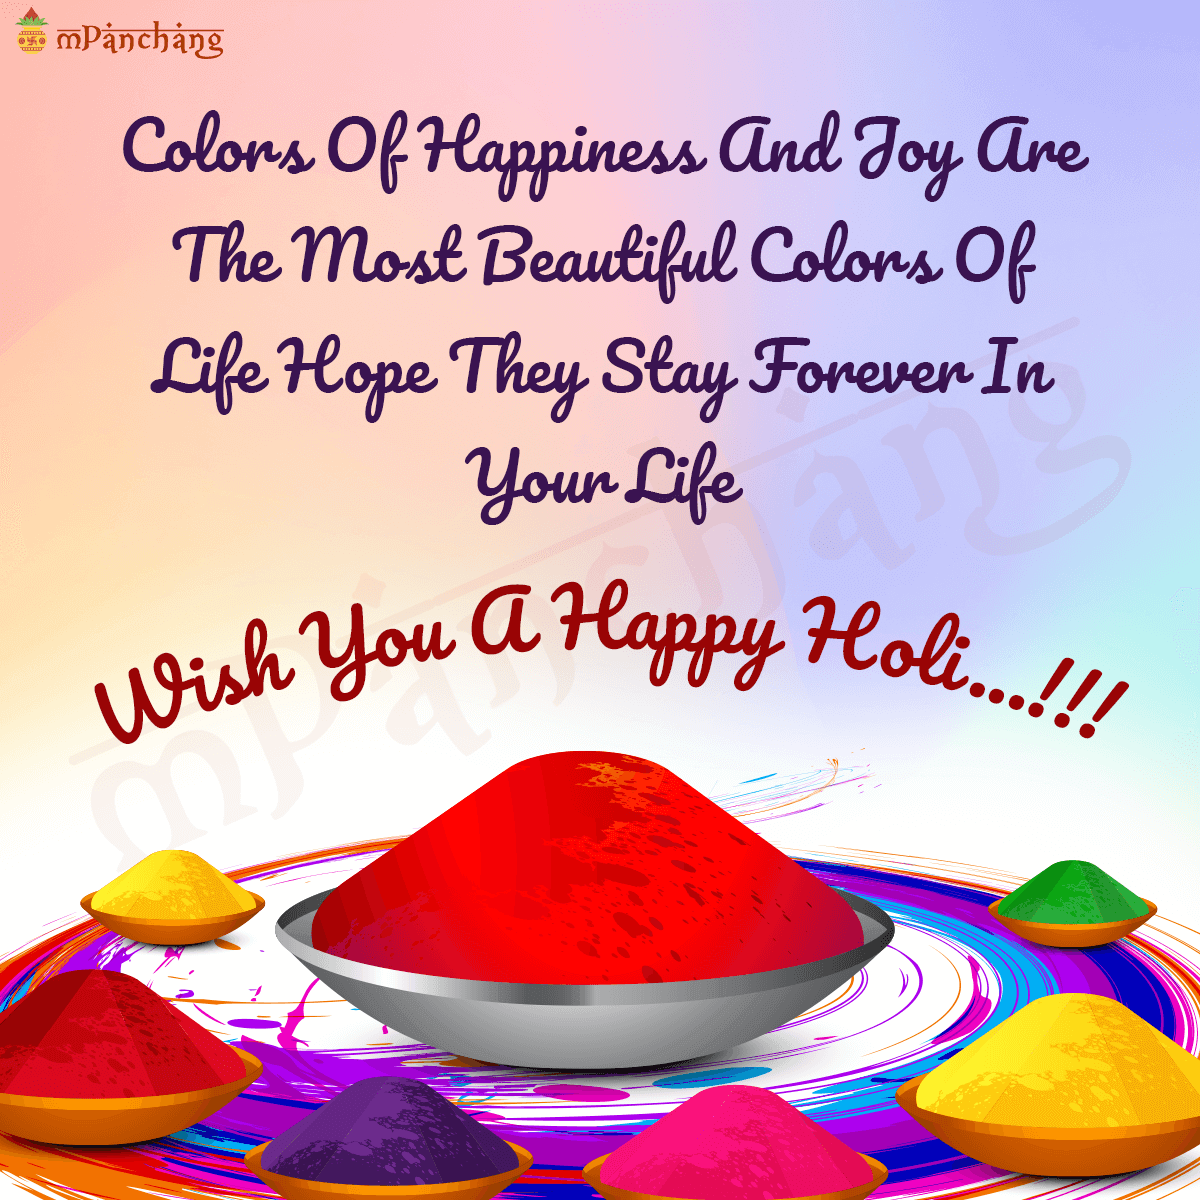 Happy Holi Wishes 2023 - Messages, Greetings, Images, Quotes & Shayari